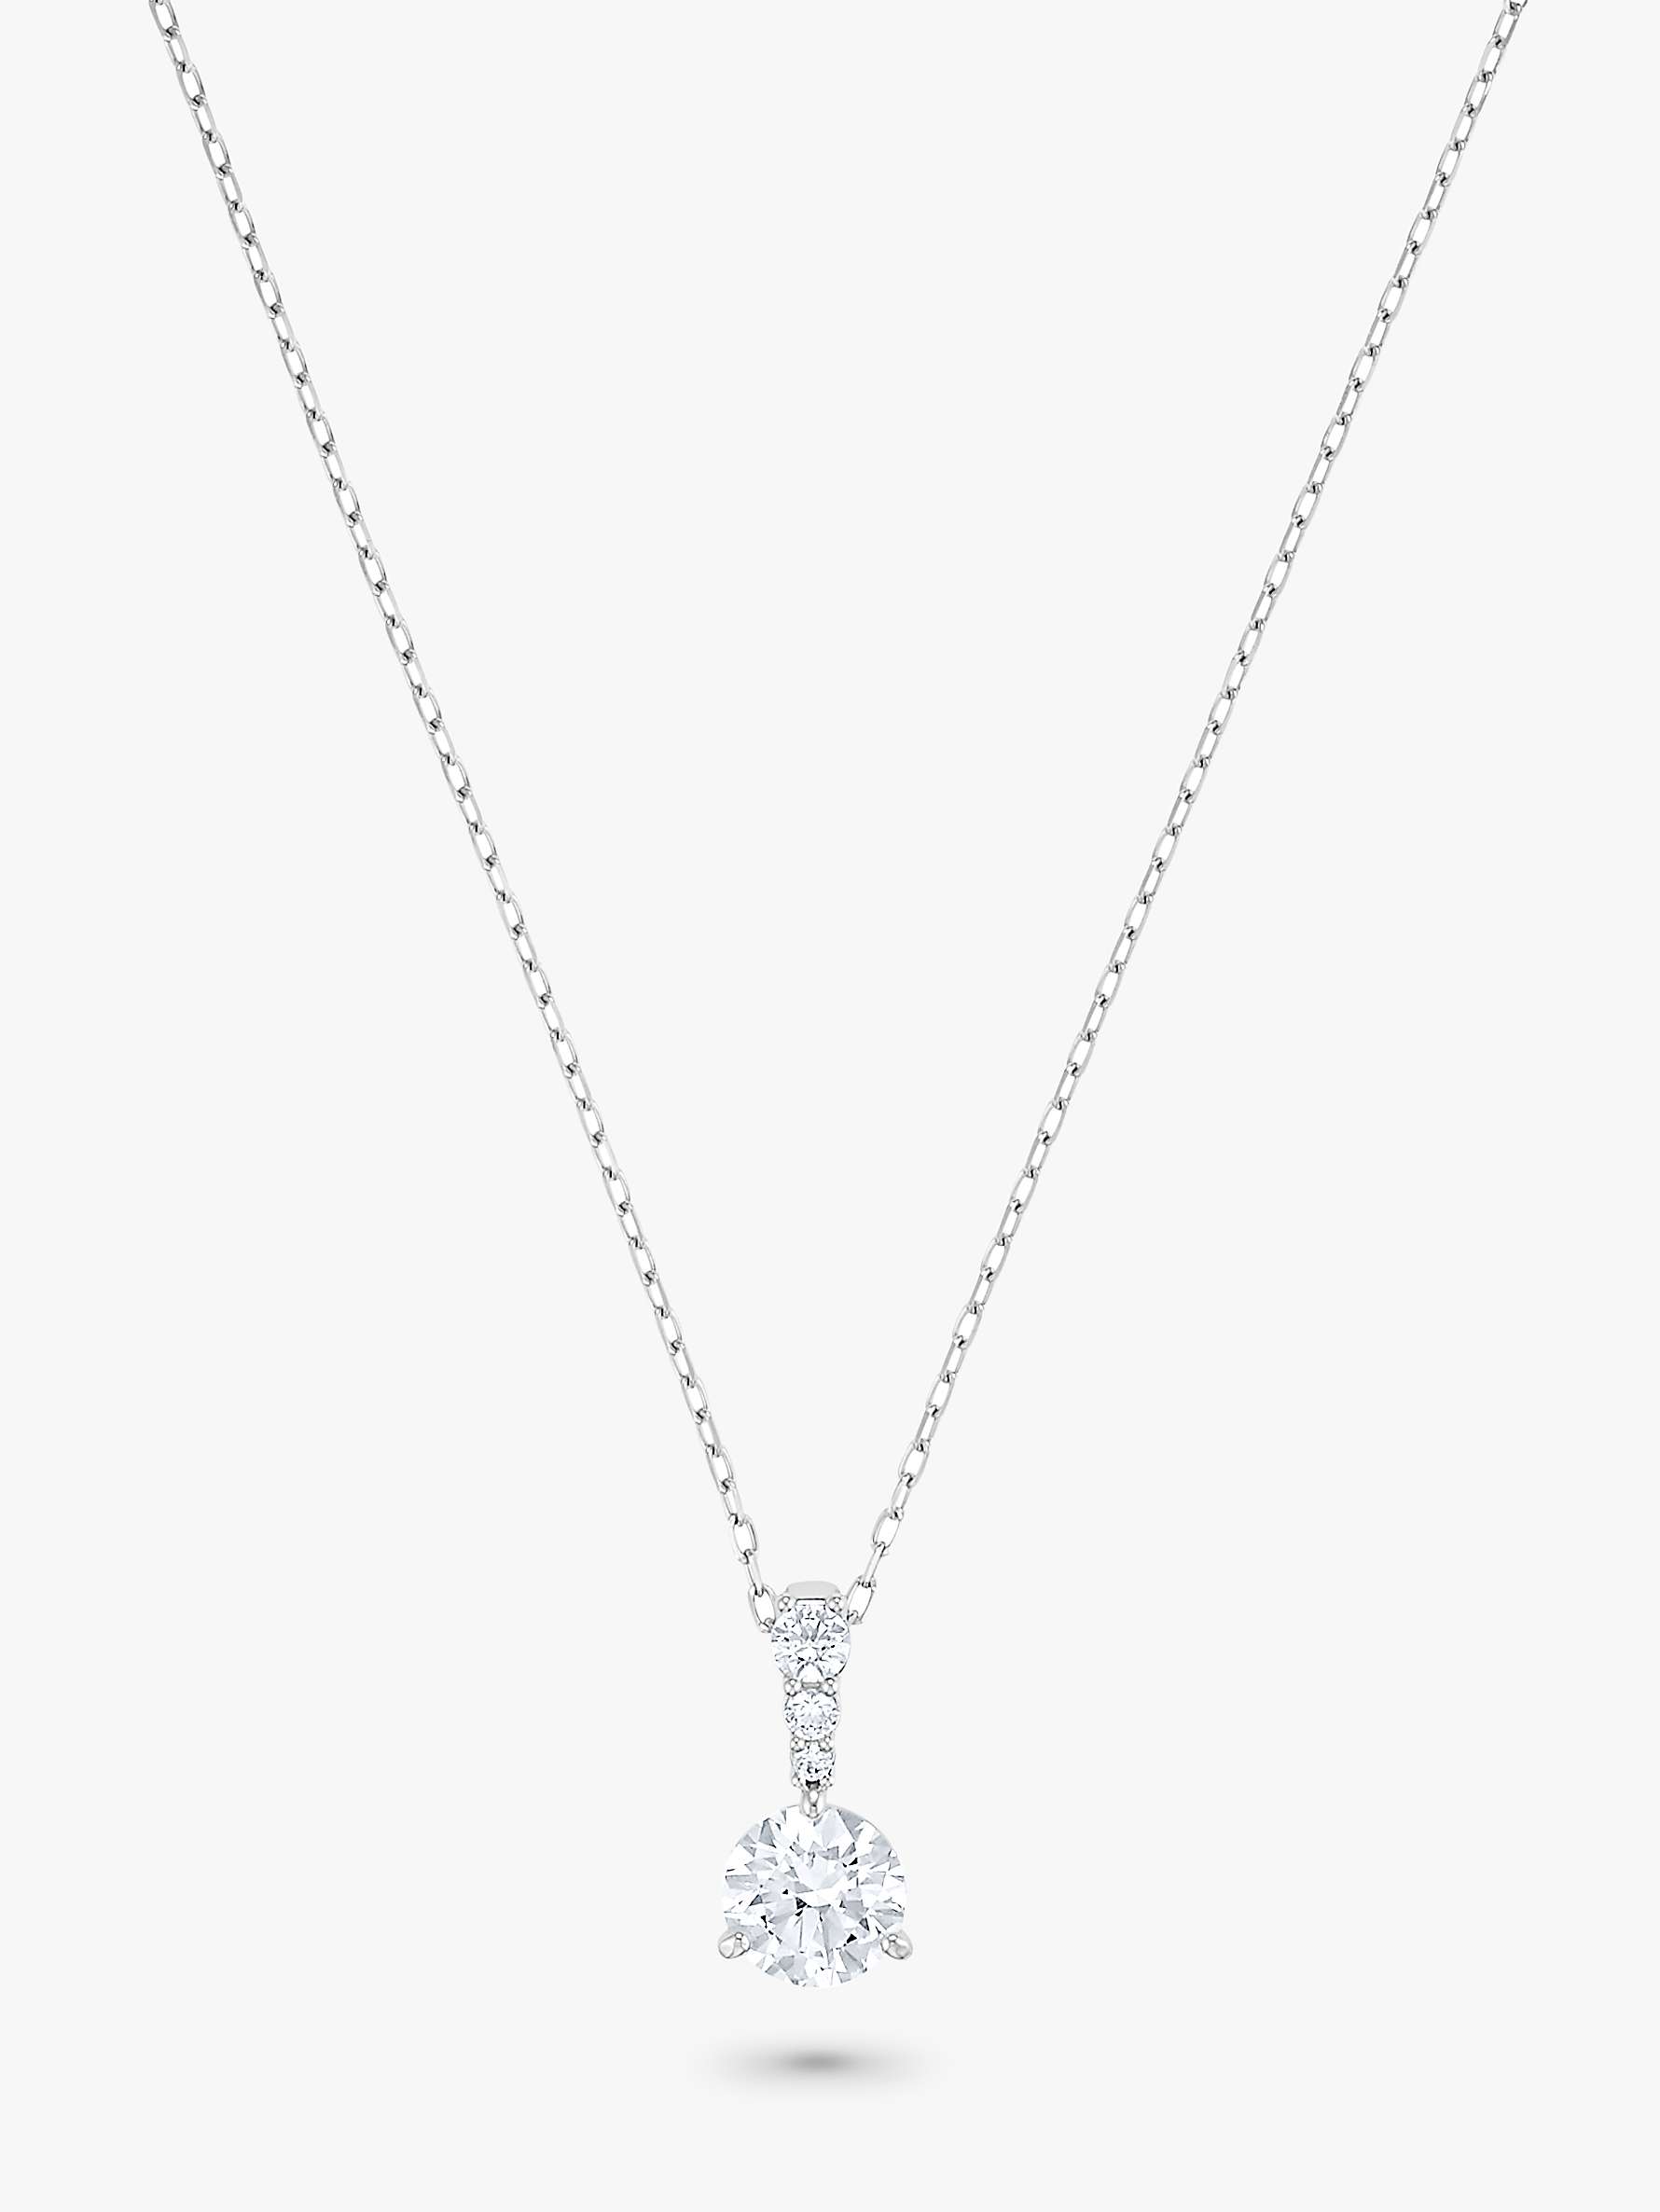 Buy Swarovski Crystals Solitaire Round Pendant Necklace, Silver Online at johnlewis.com